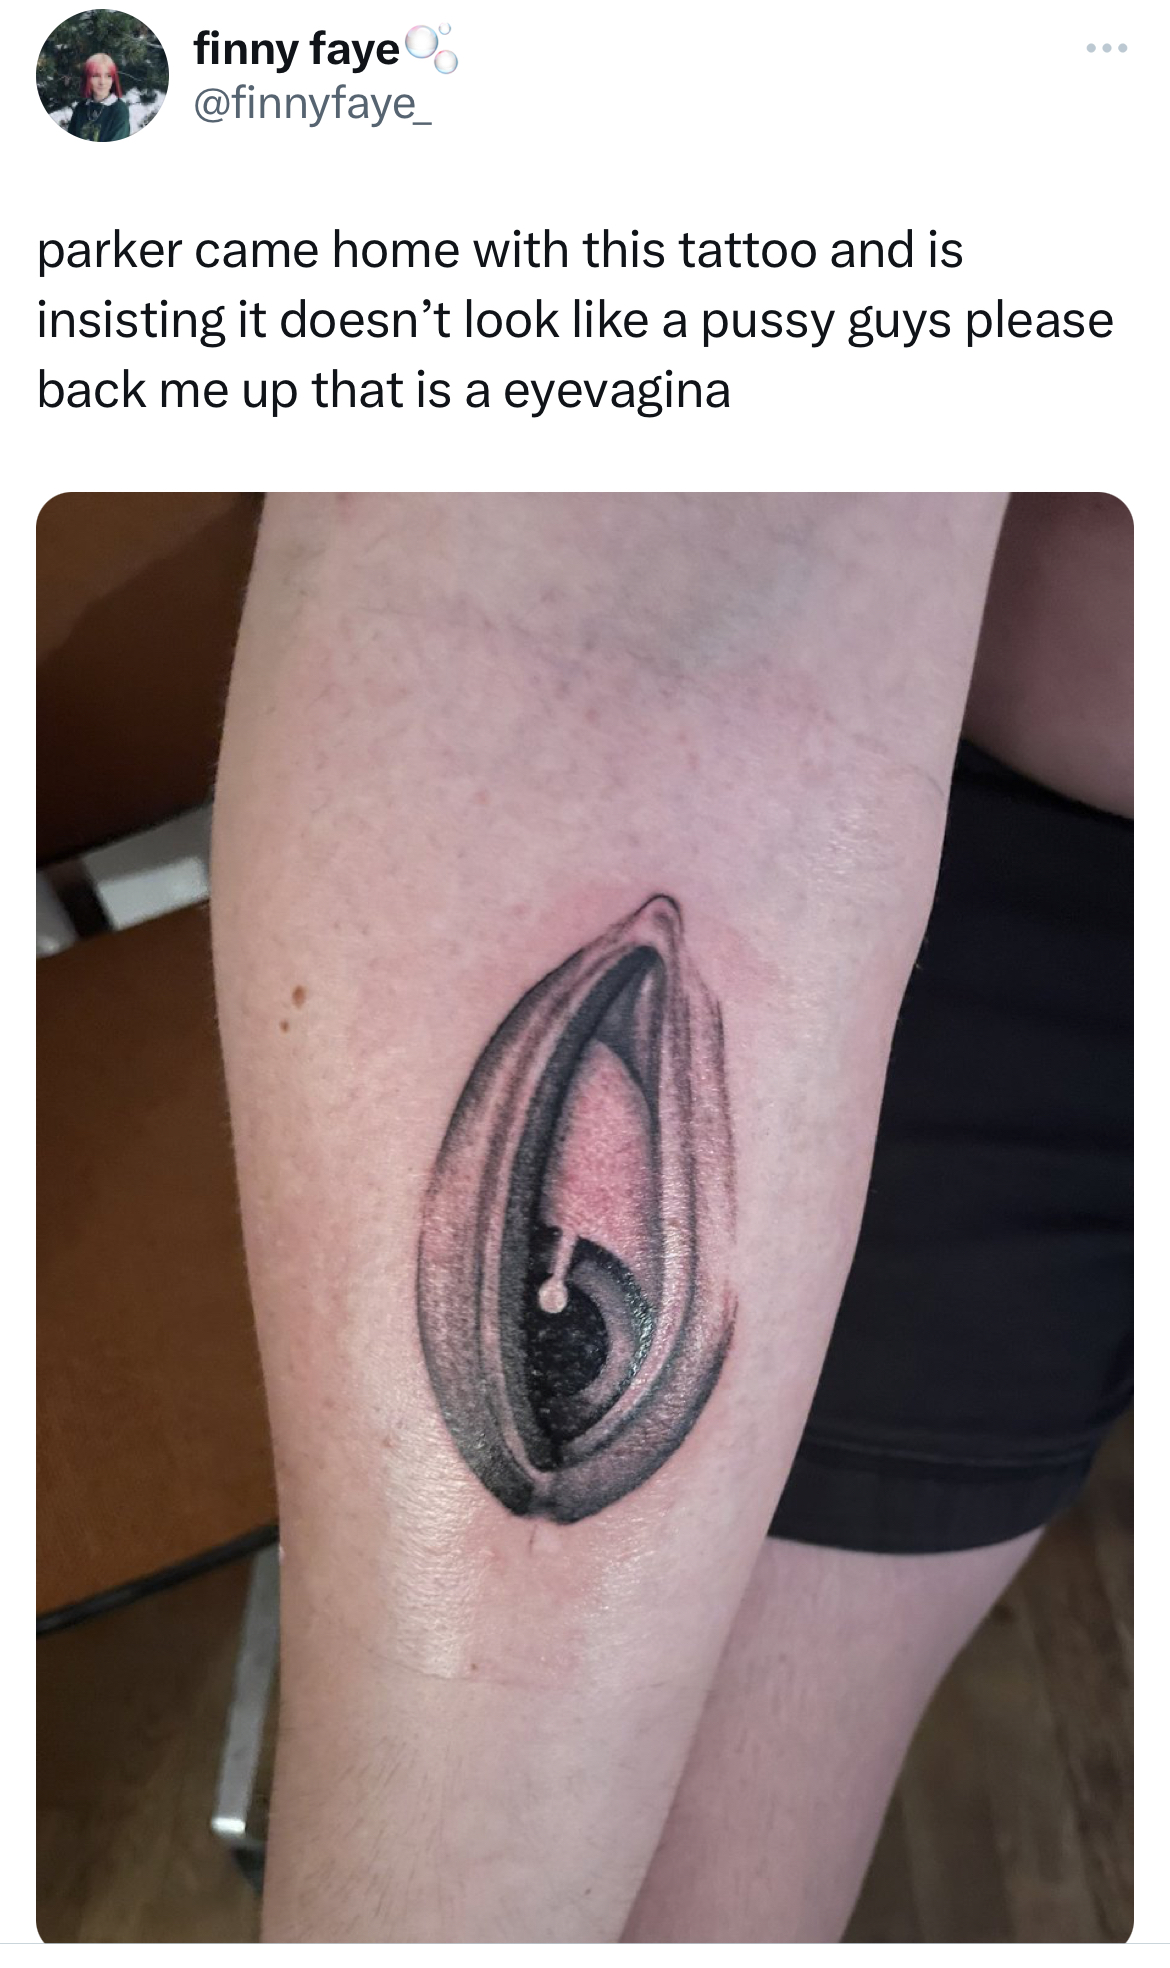 savage tweets - temporary tattoo - finny faye parker came home with this tattoo and is insisting it doesn't look a pussy guys please back me up that is a eyevagina